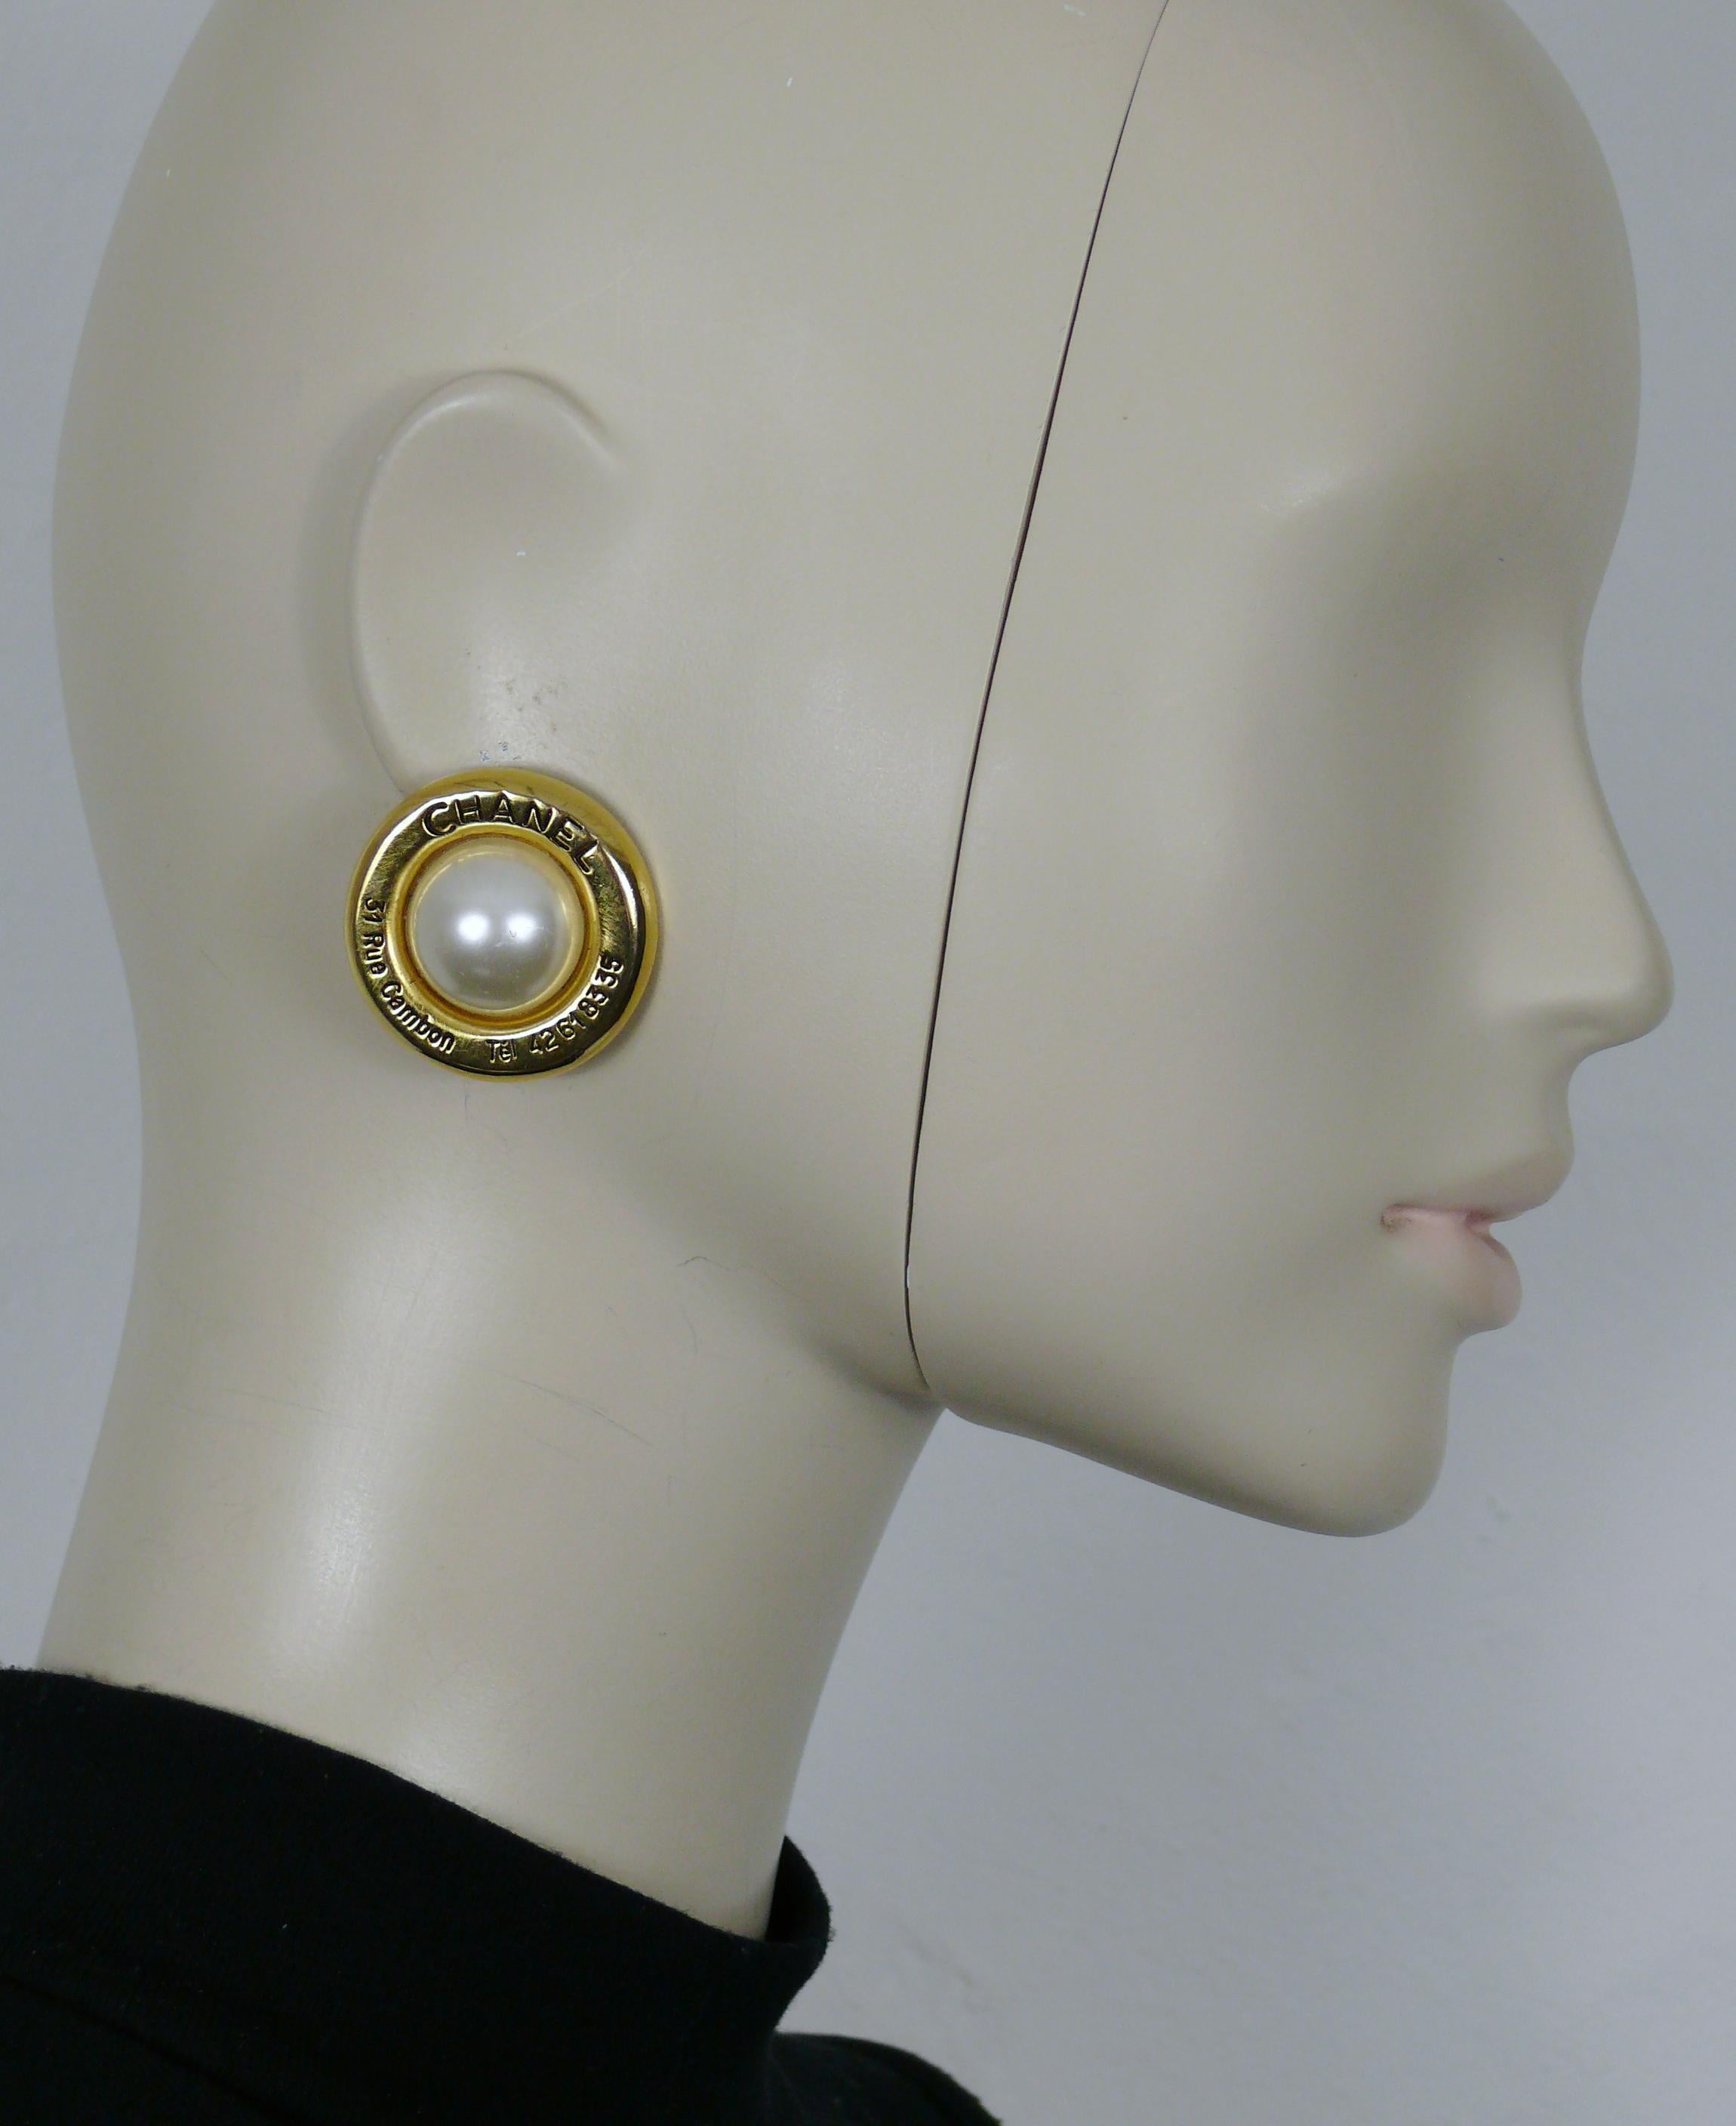 CHANEL vintage gold tone clip-on earrings, embossed CHANEL 31 RUE CAMBON with phone number, embellished with a large dome faux pearl.

Embossed CHANEL on the reverse sides.

Indicative measurements : diameter approx. 3.5 cm (1.38 inches).

Material